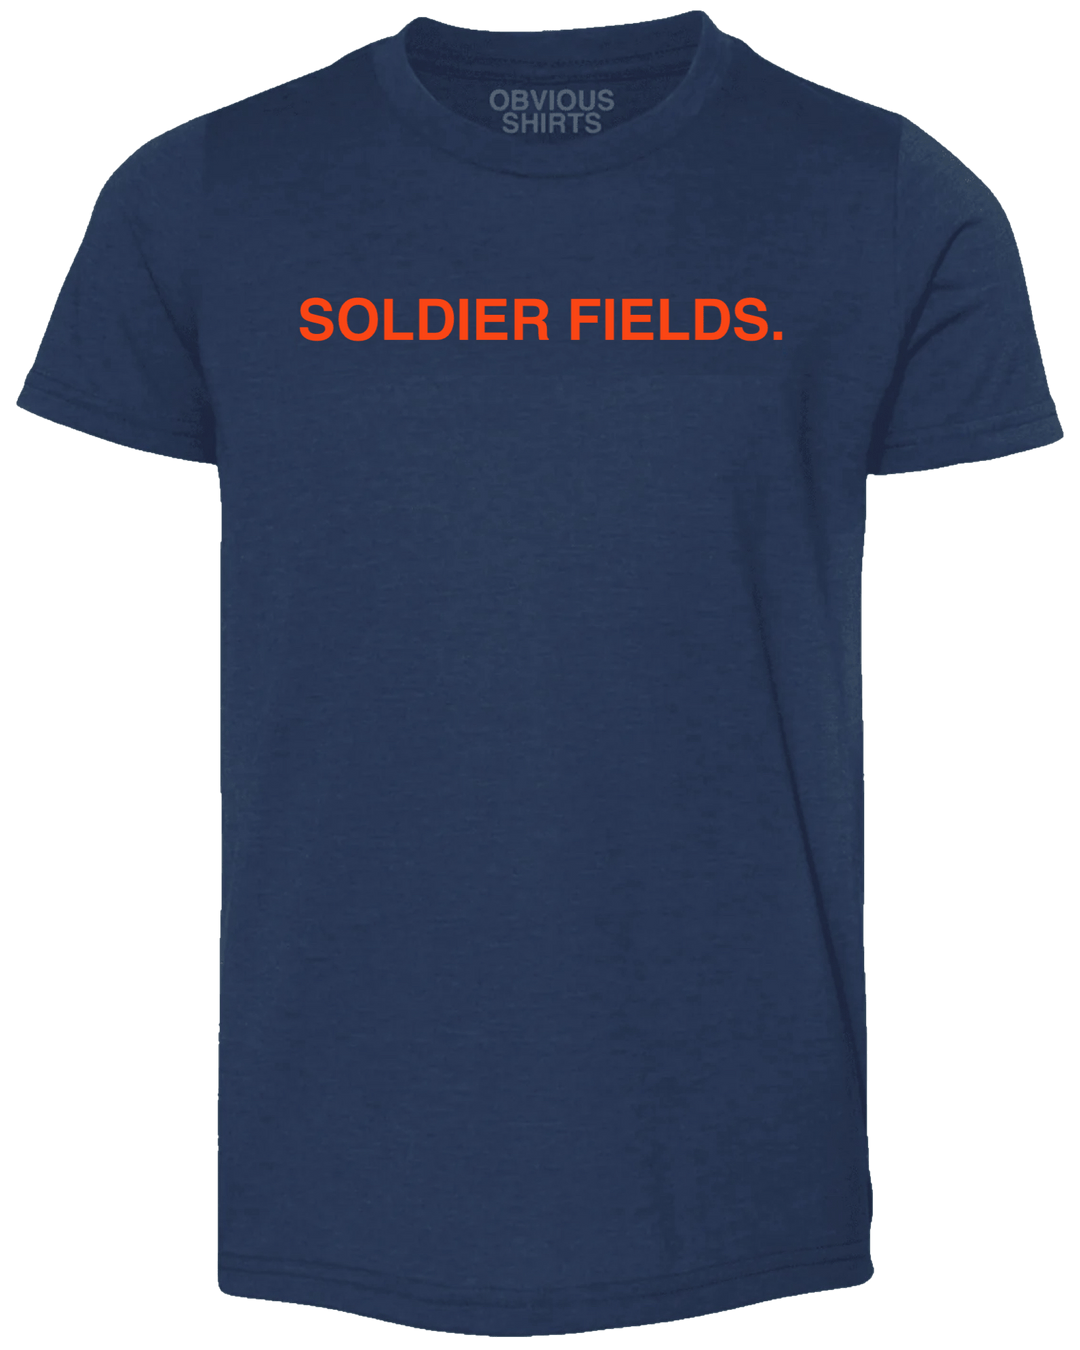 SOLDIER FIELDS. (YOUTH) - OBVIOUS SHIRTS